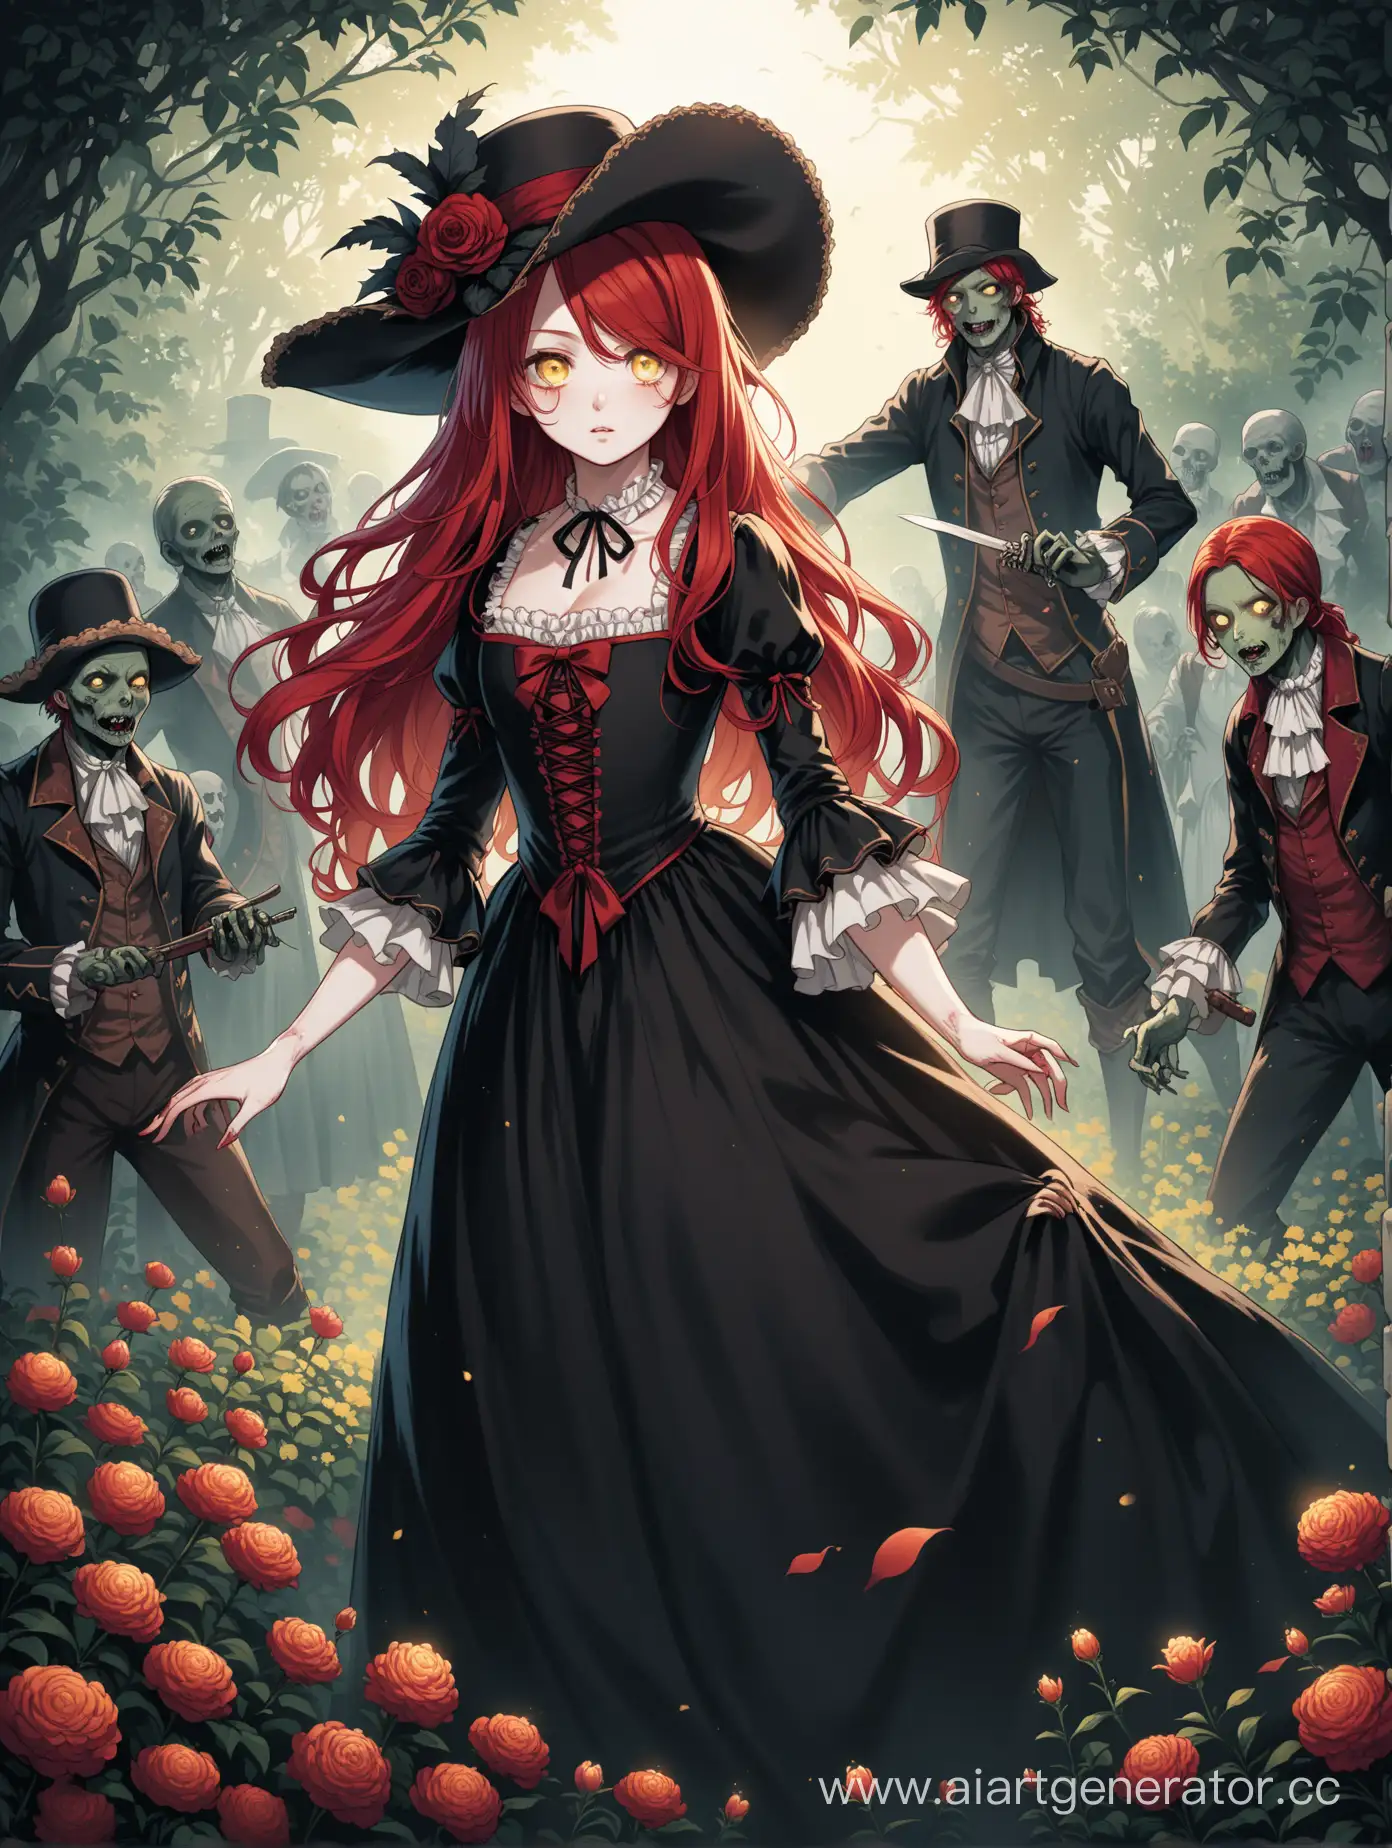 RedHaired-Girl-Battling-a-Zombie-in-a-Gothic-Flower-Garden